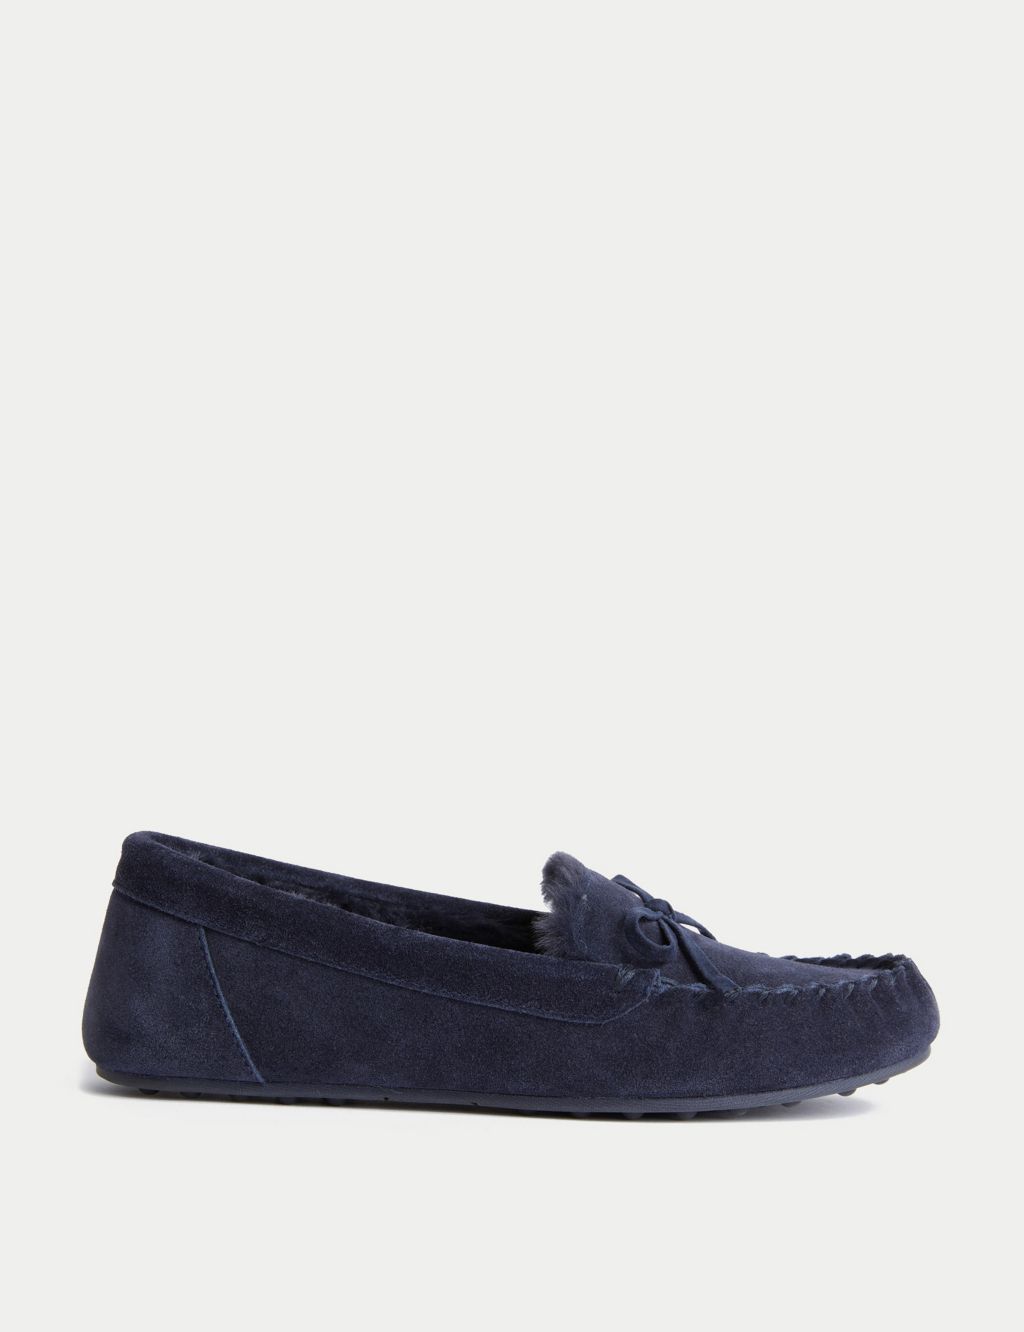 Suede Bow Faux Fur Lined Moccasin Slippers image 1